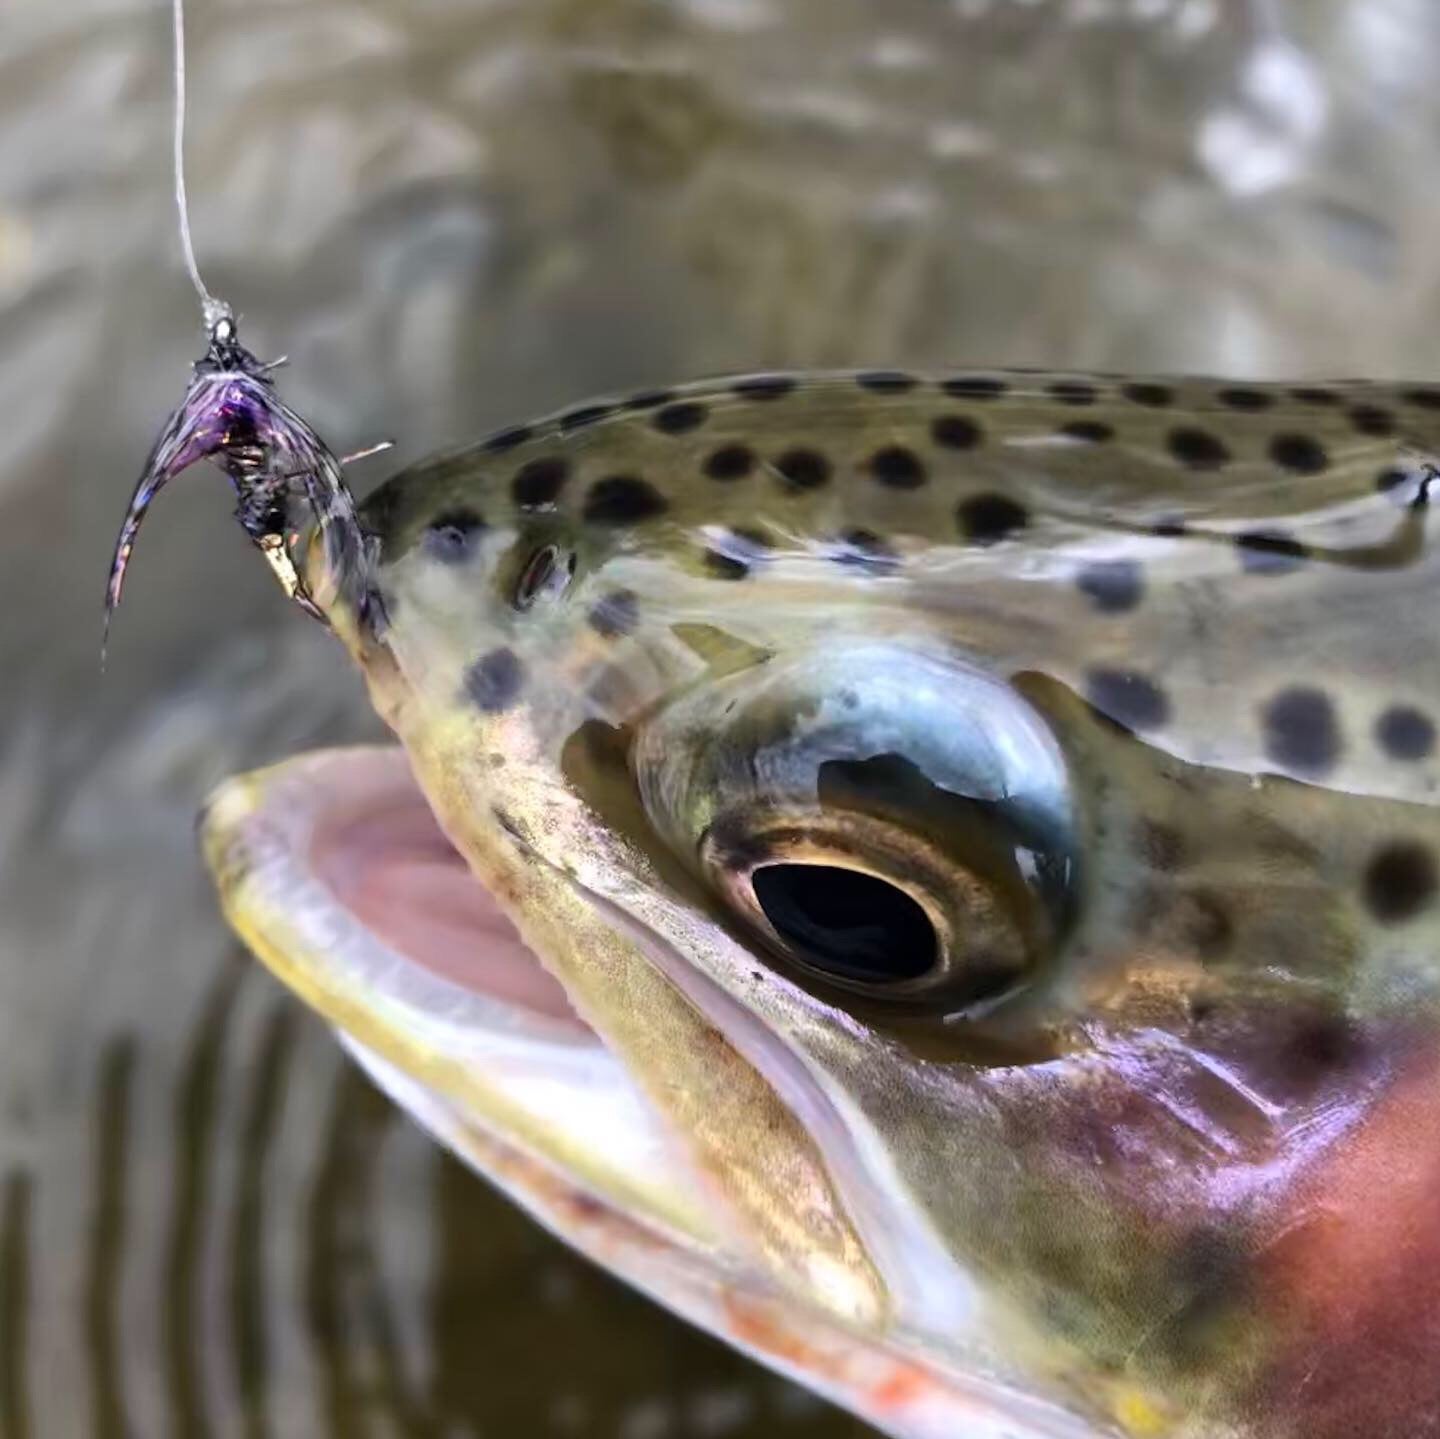 How to swing flies for trout?